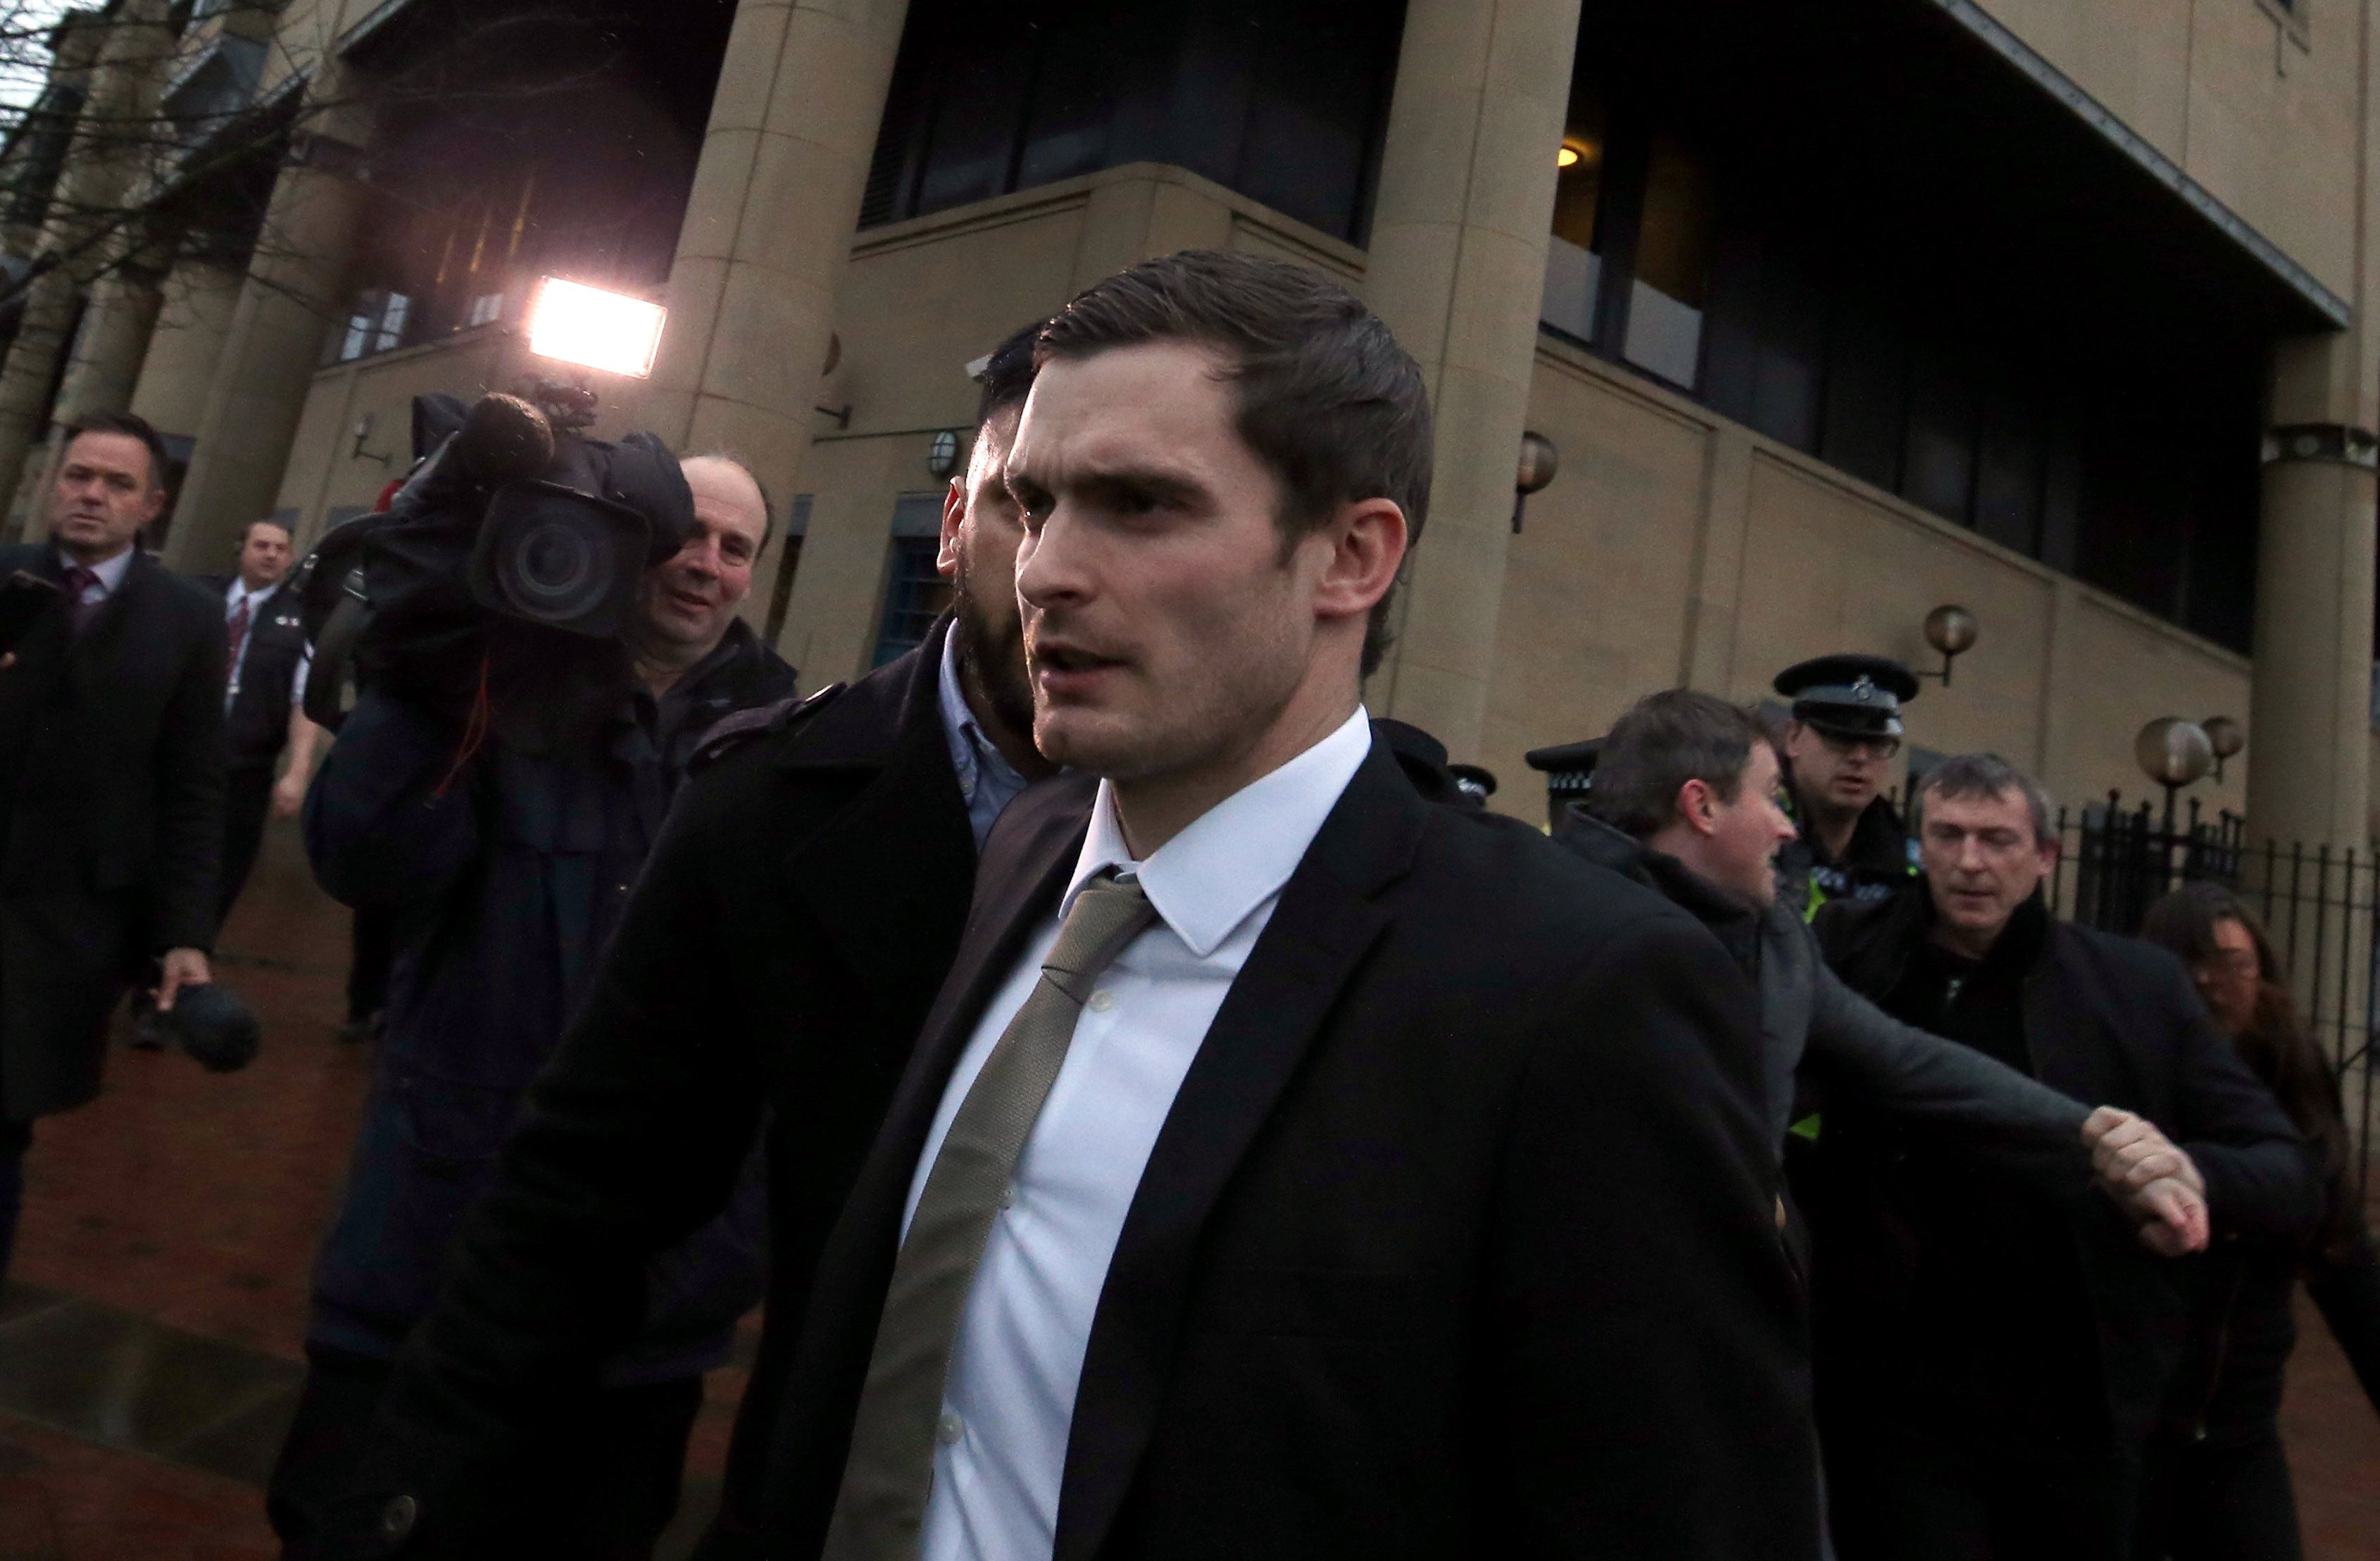 BRADFORD, ENGLAND - MARCH 02: Footballer Adam Johnson leaves Bradford Crown Court on day fourteen of the trial where he was found guilty of one count of child sexual assault charges on March 2, 2016 in Bradford, England. The former Sunderland FC midfielder, 28, from Castle Eden, County Durham, had already admitted one charge of sexual activity with a child and one charge of child grooming. (Photo by Nigel Roddis/Getty Images)